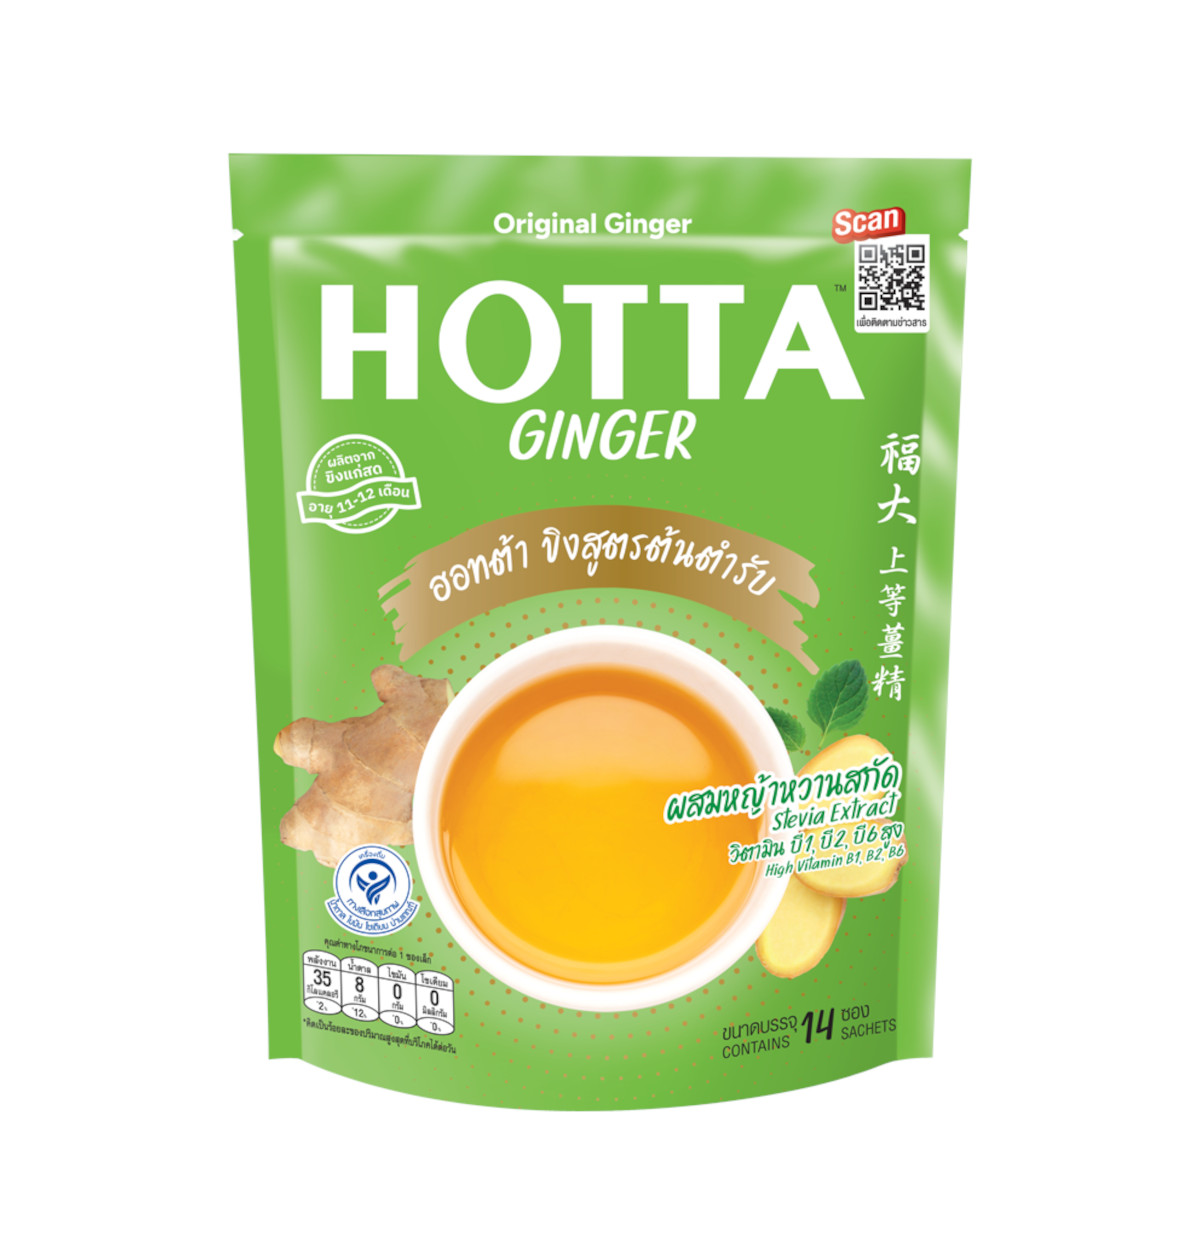 HOTTA Instant Ginger with Stevia Extract Original Formula 9g.x14 Sachets